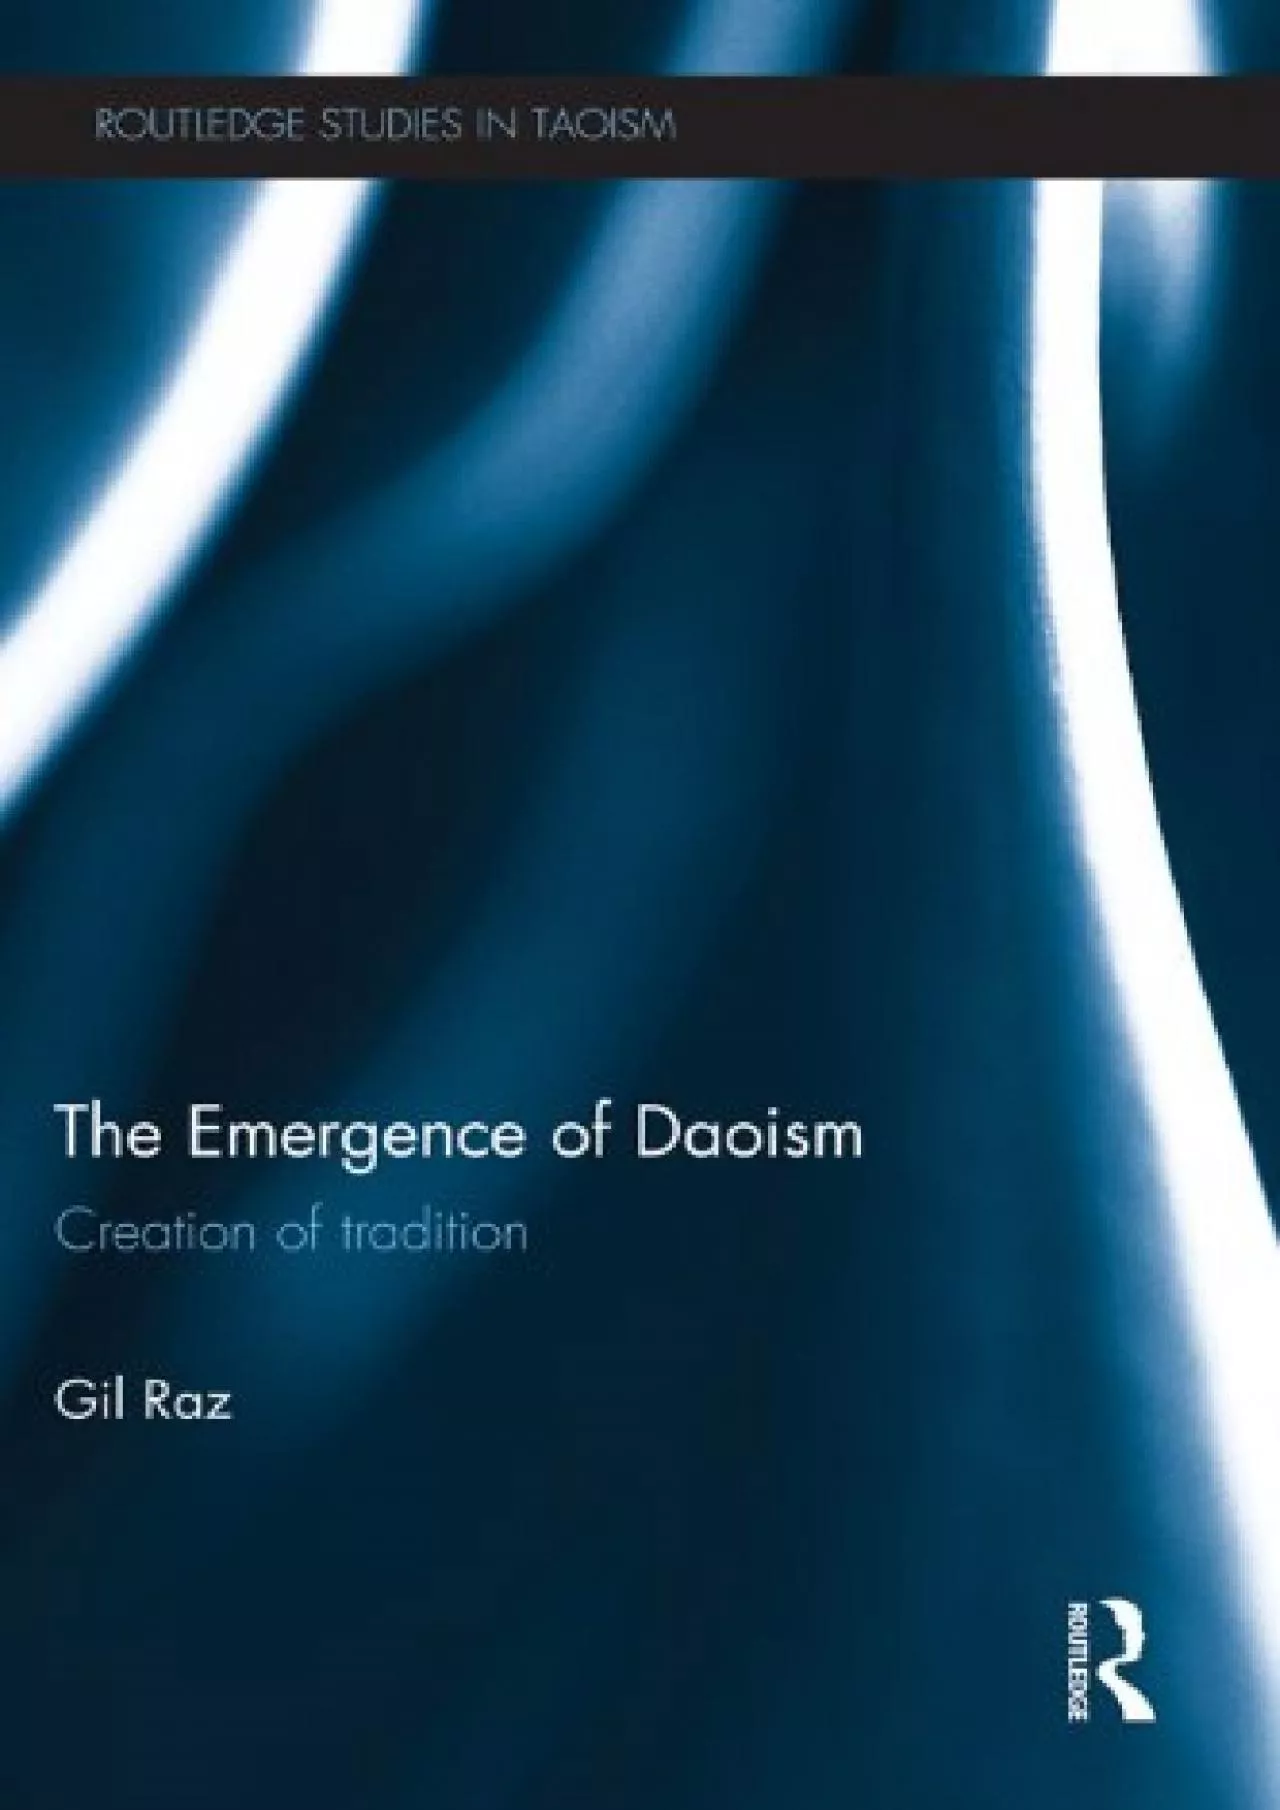 [DOWNLOAD]-The Emergence of Daoism: Creation of Tradition (Routledge Studies in Taoism